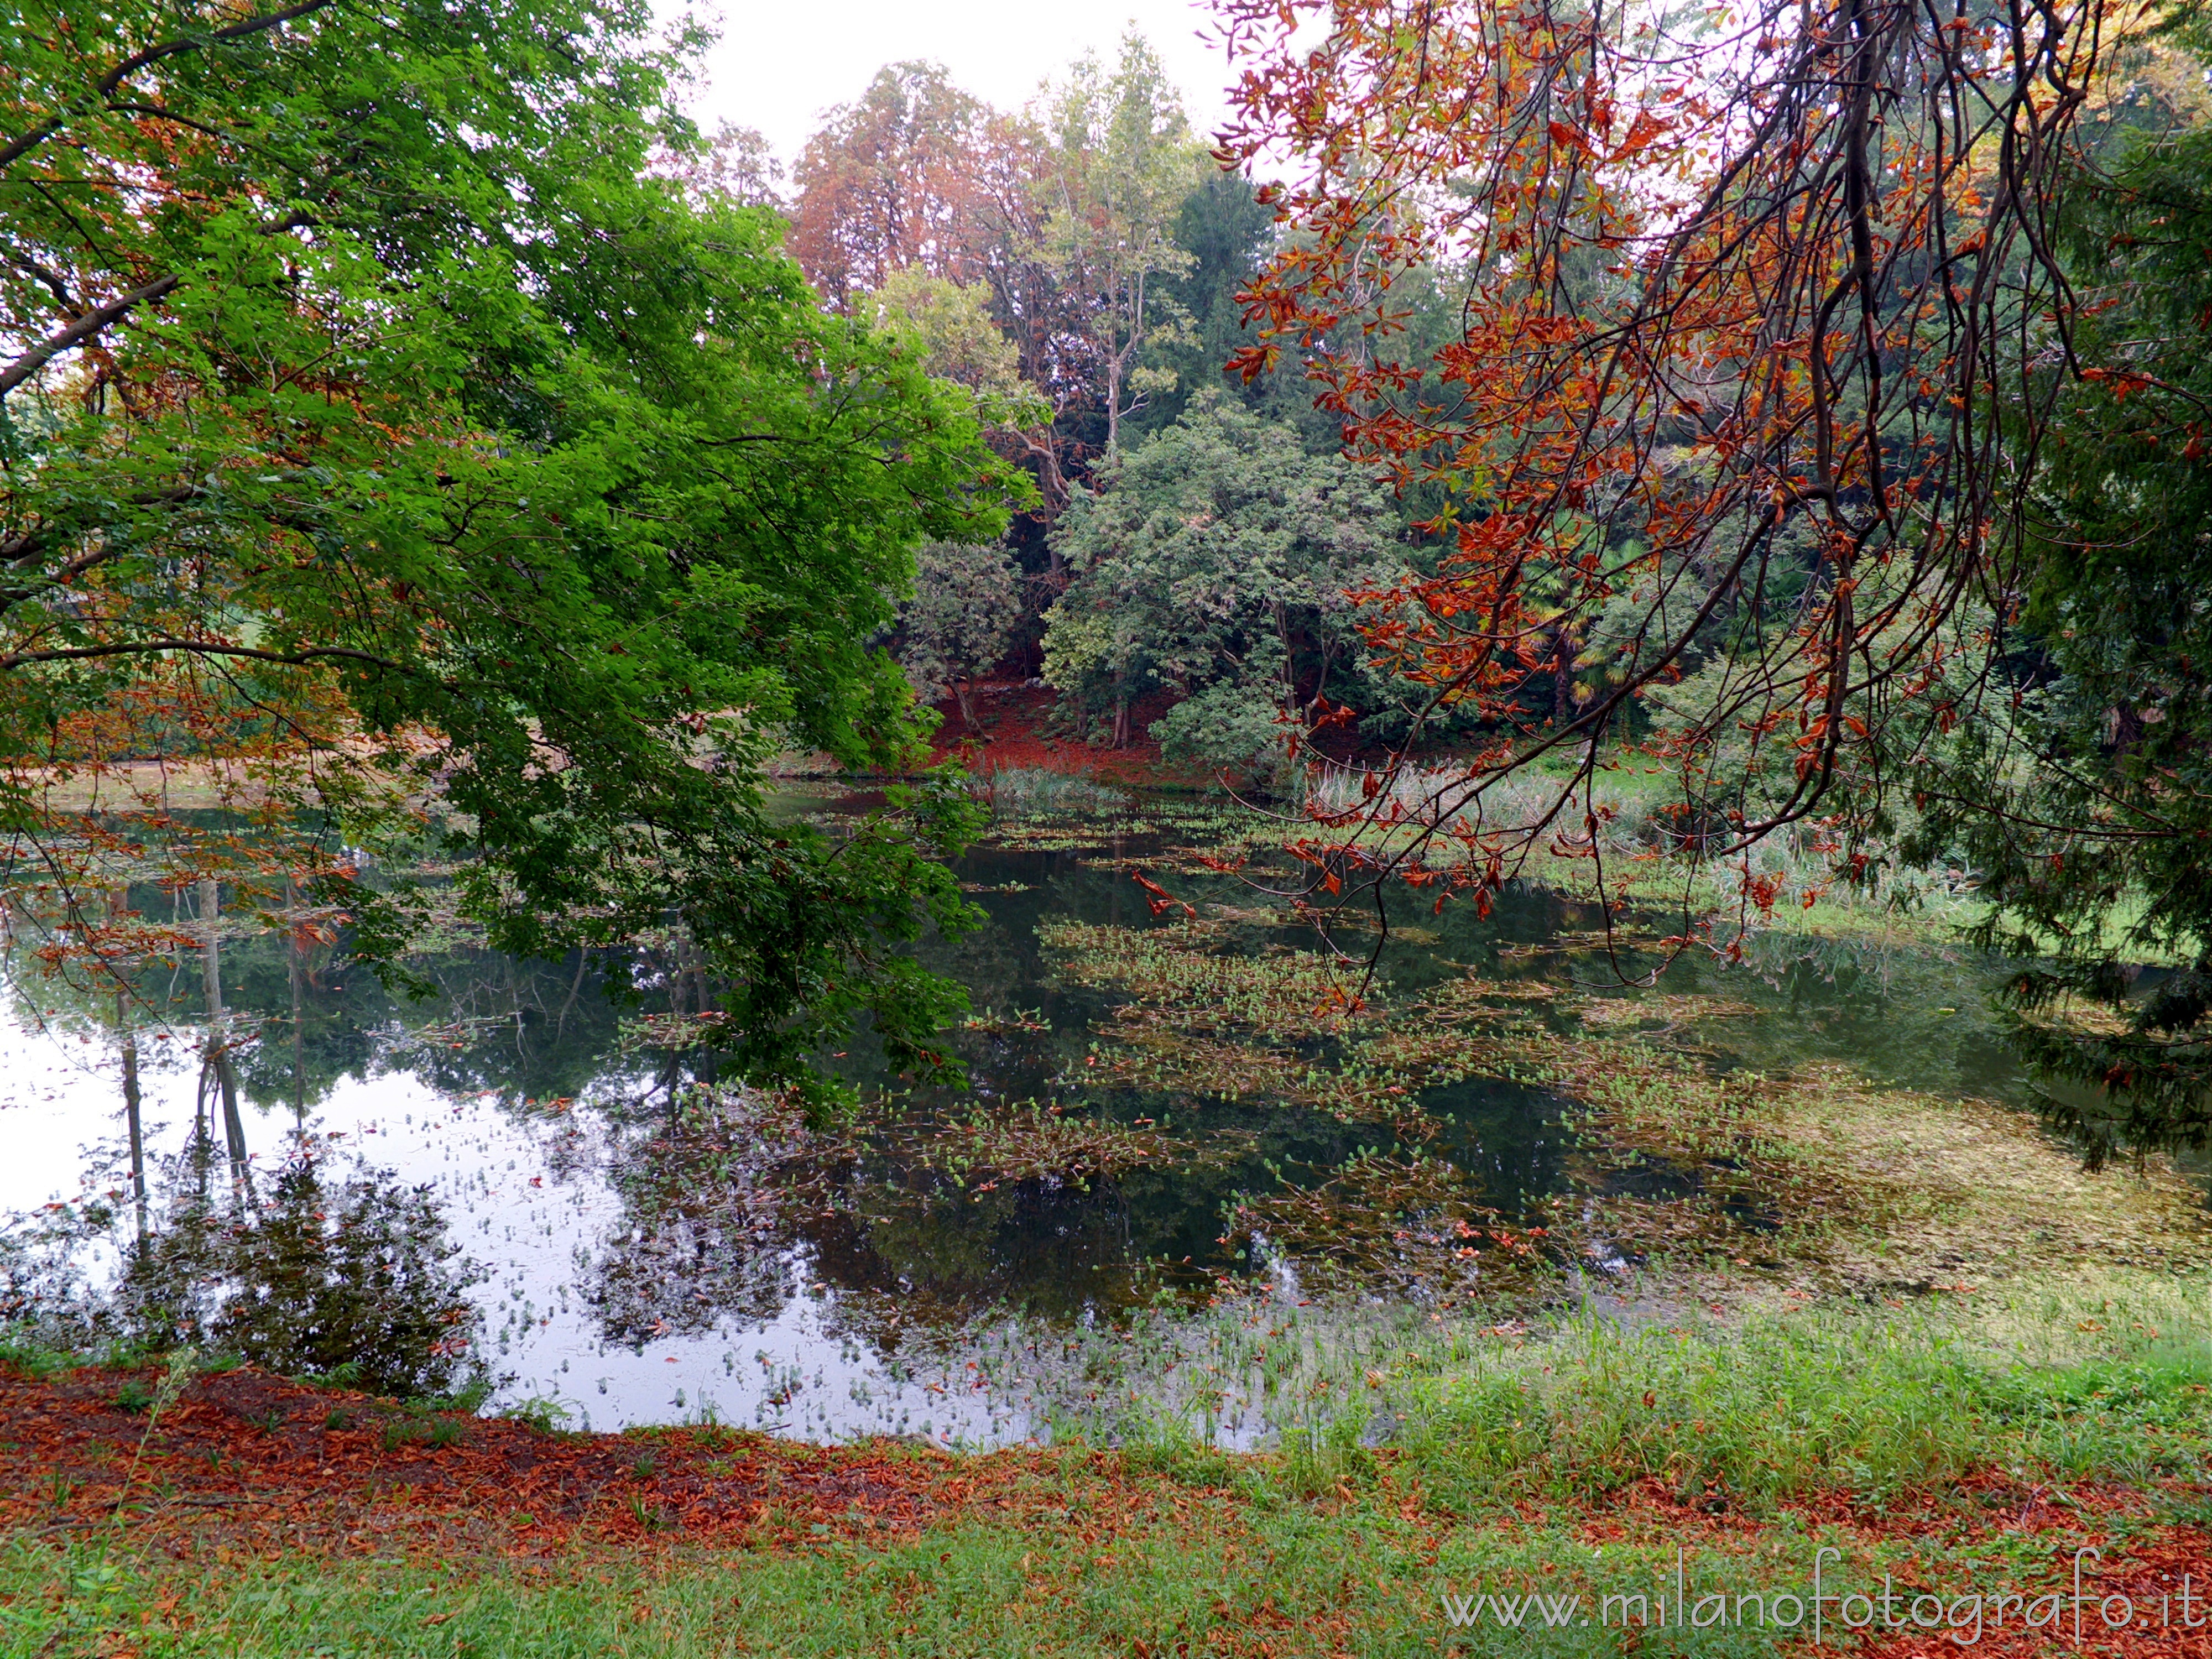 Sirtori (Lecco, Italy): The pond of the park of Villa Besana at the beginning of autumn - Sirtori (Lecco, Italy)